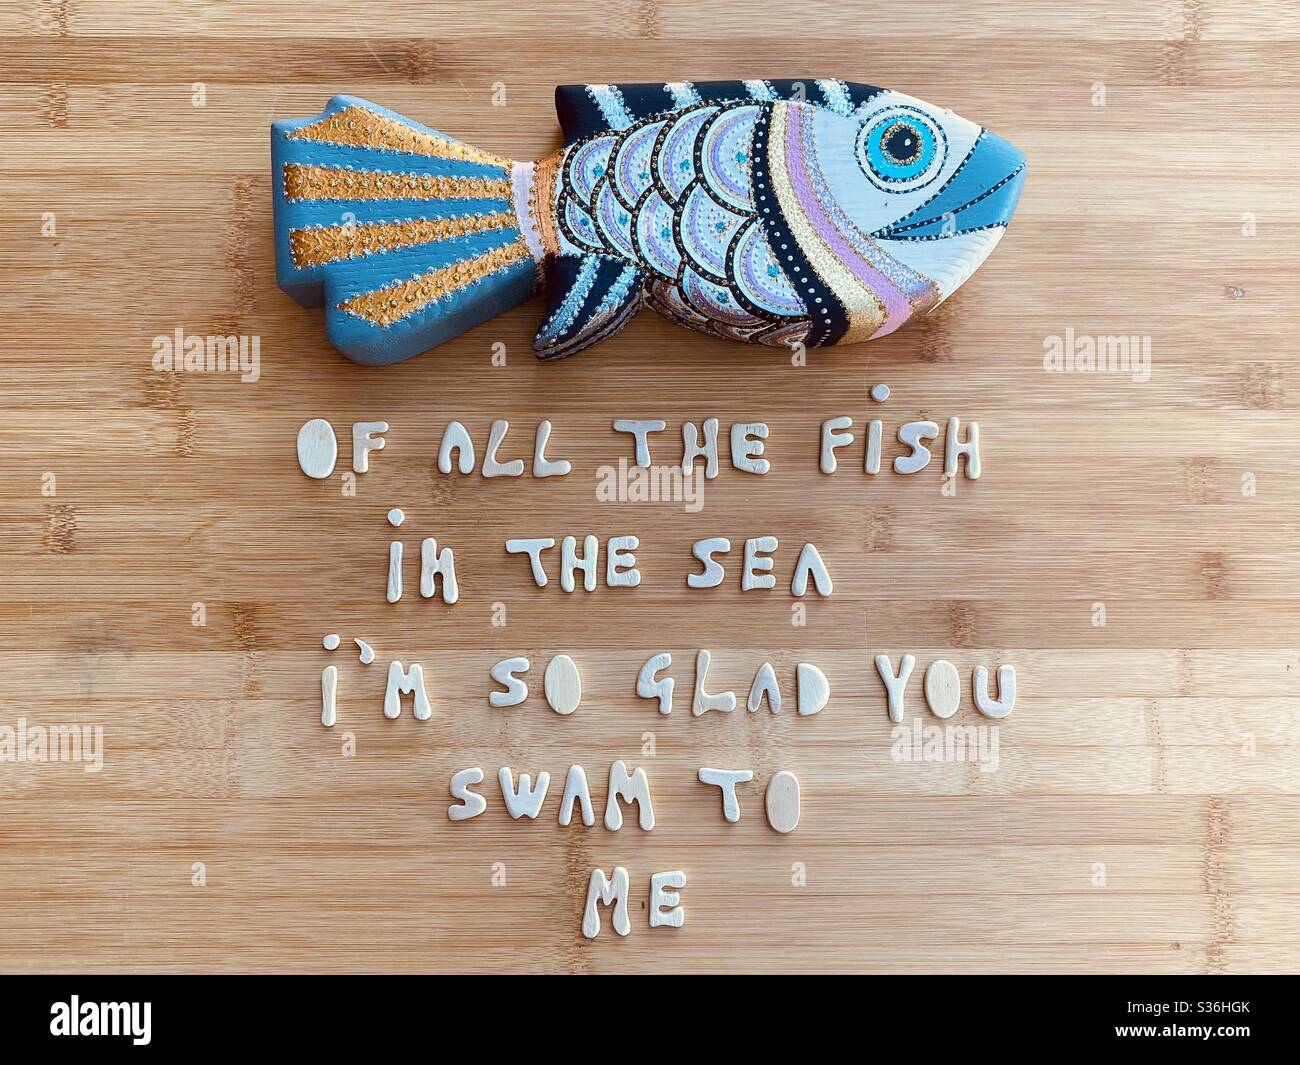 Of all the fish in the sea, I’m so glad you swamto me Stock Photo